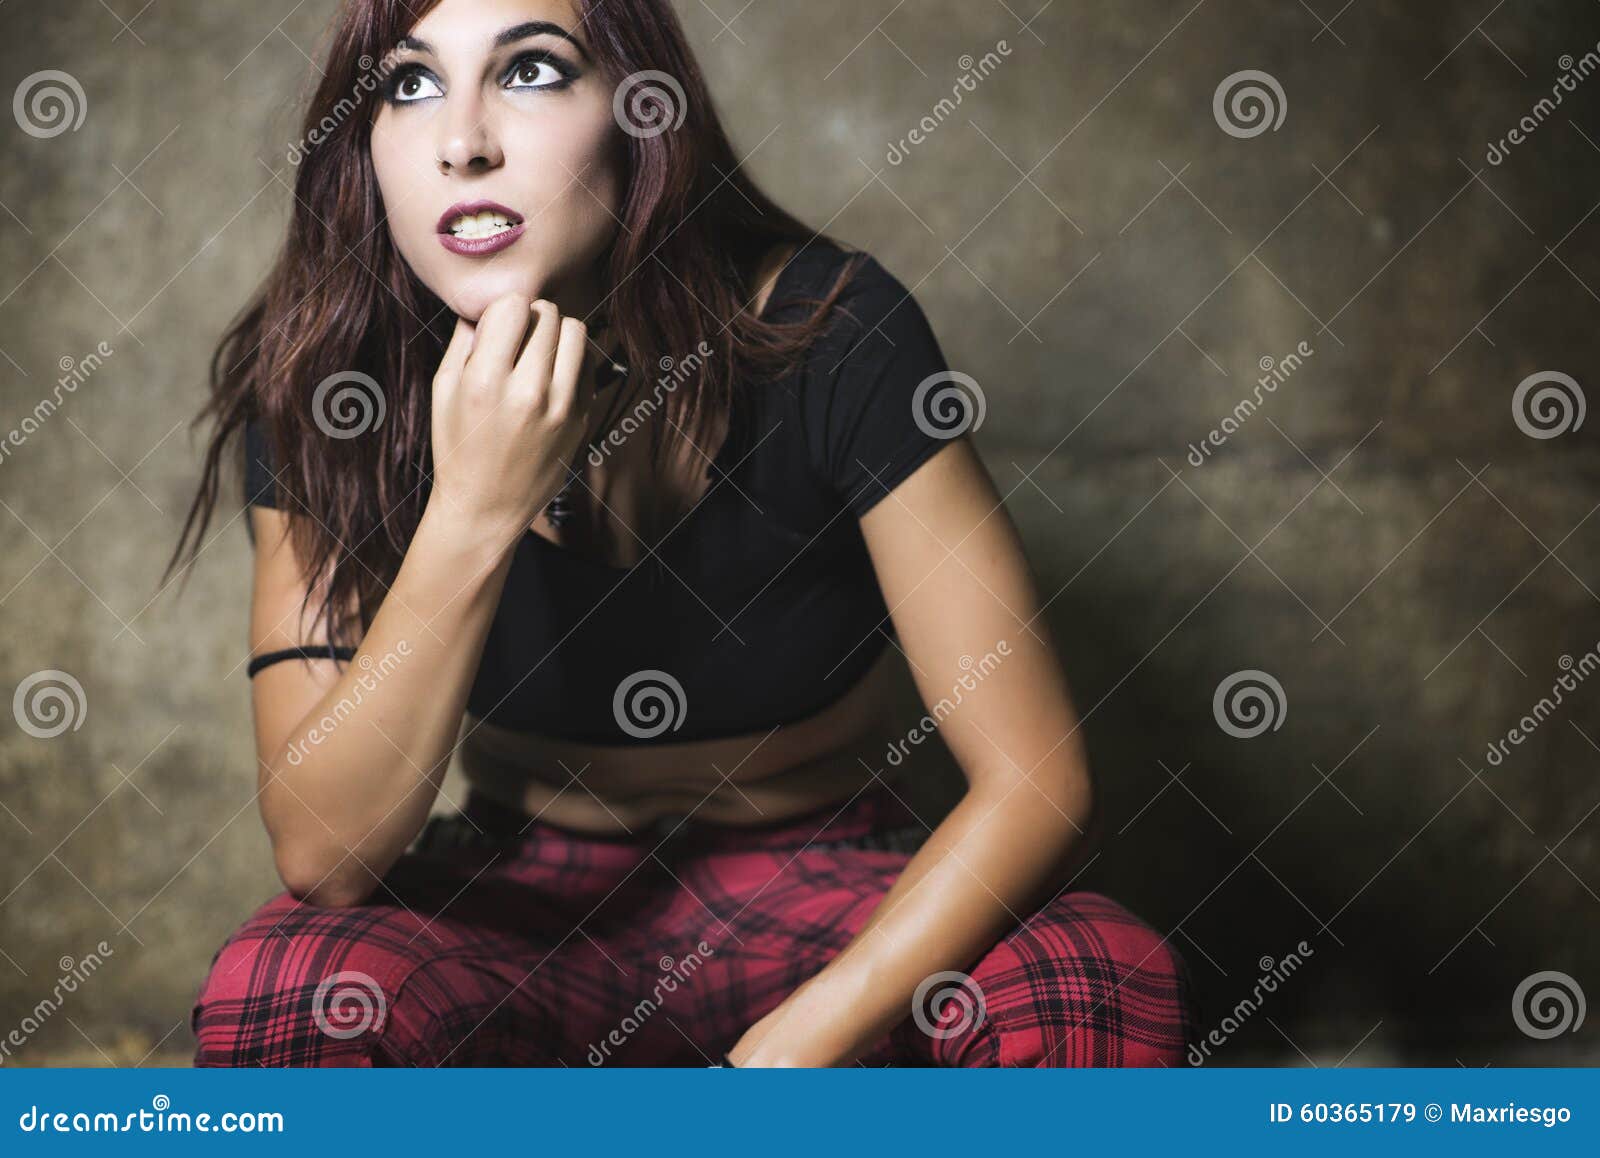 Gothic And Emo Girl Look Stock Image Image Of Background